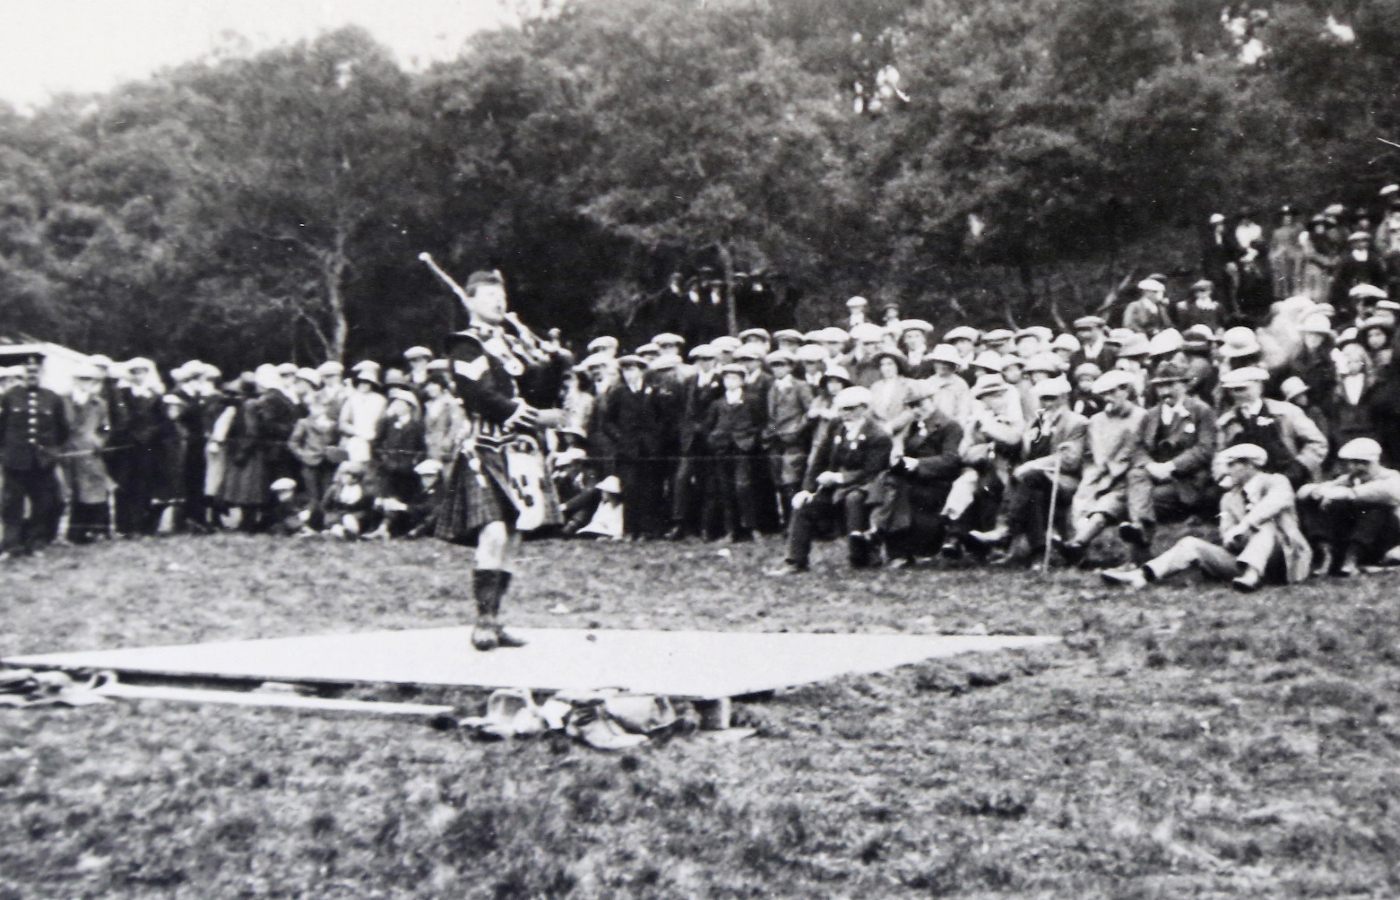 The Cabrach Picnic and Games was a staple of the Highland Games calendar and ran annually from 1877 to 1935.